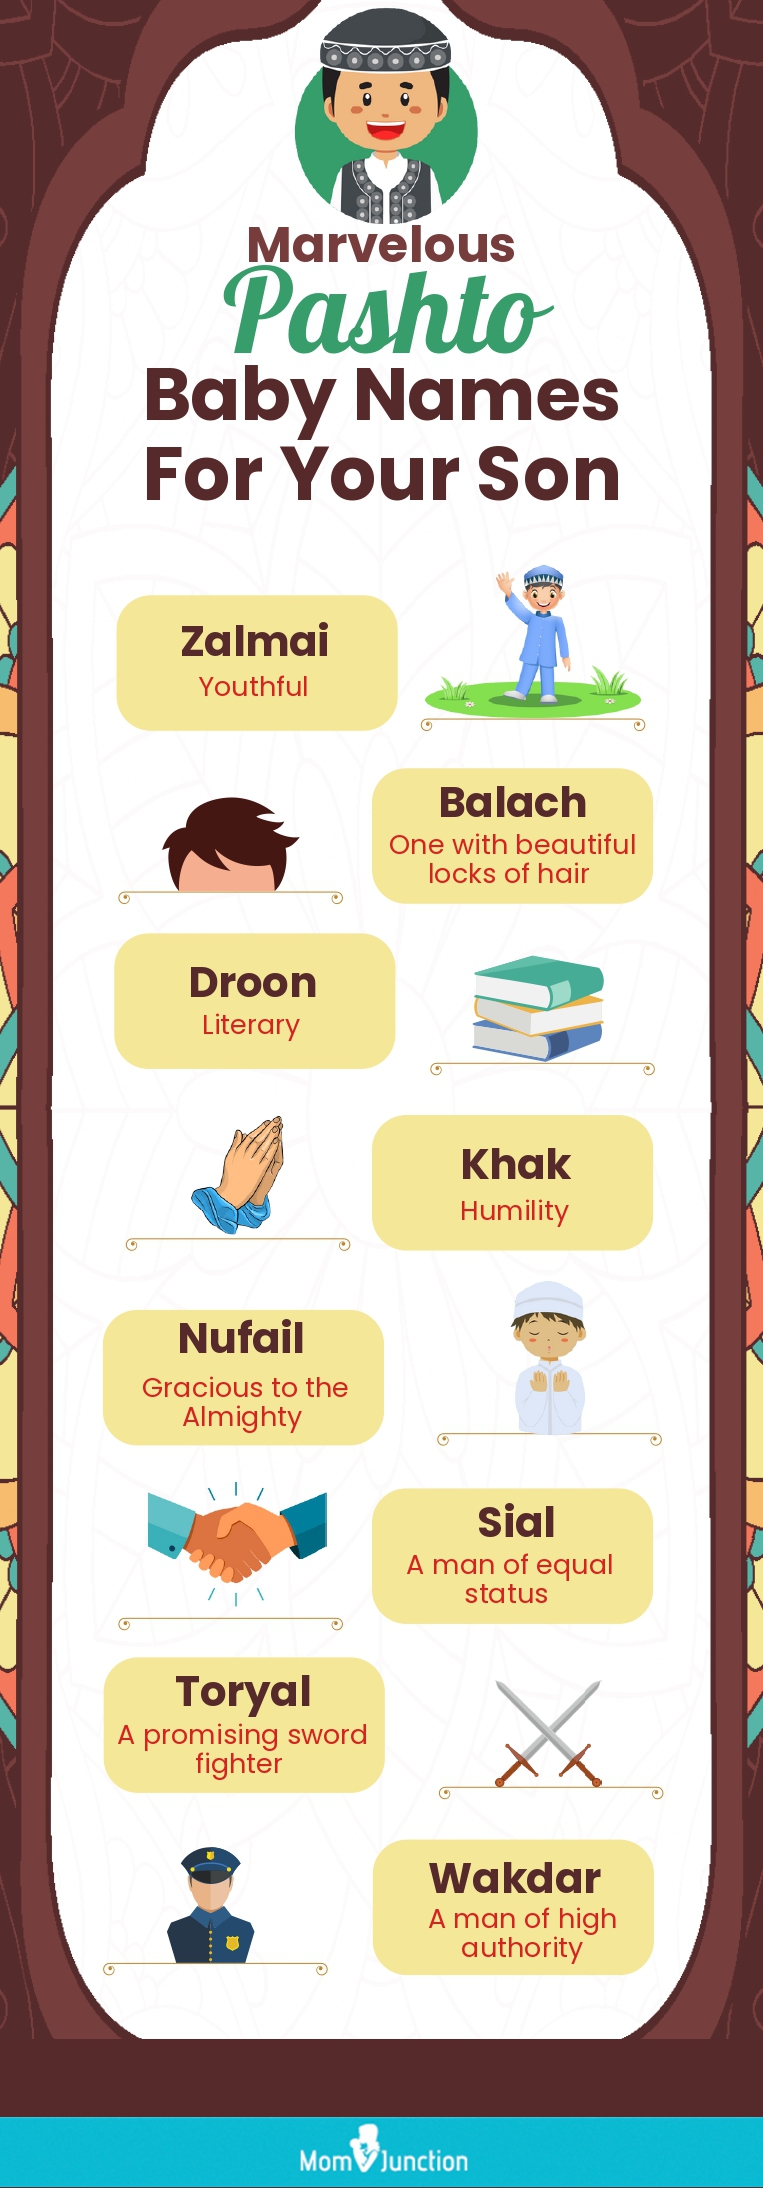 marvelous pashto baby names for your son (infographic)